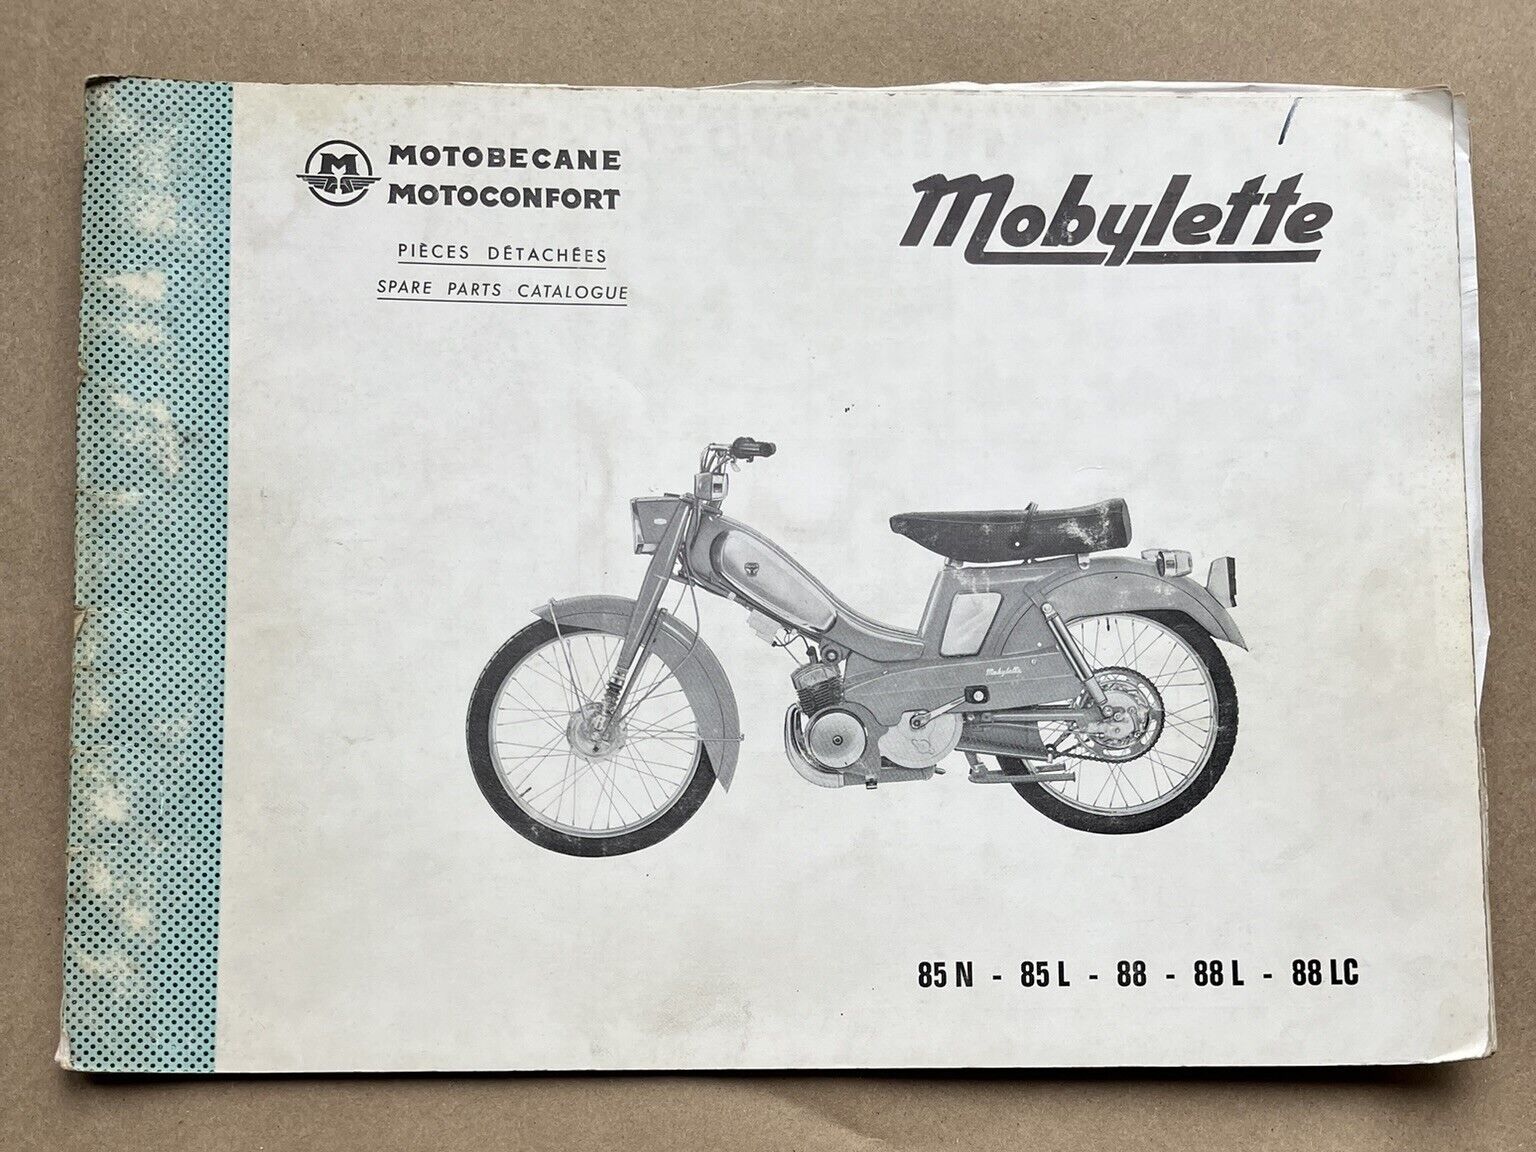 Motobecane Motoconfort Mobylette Type 92 92 N Spare Part Catalog French texts